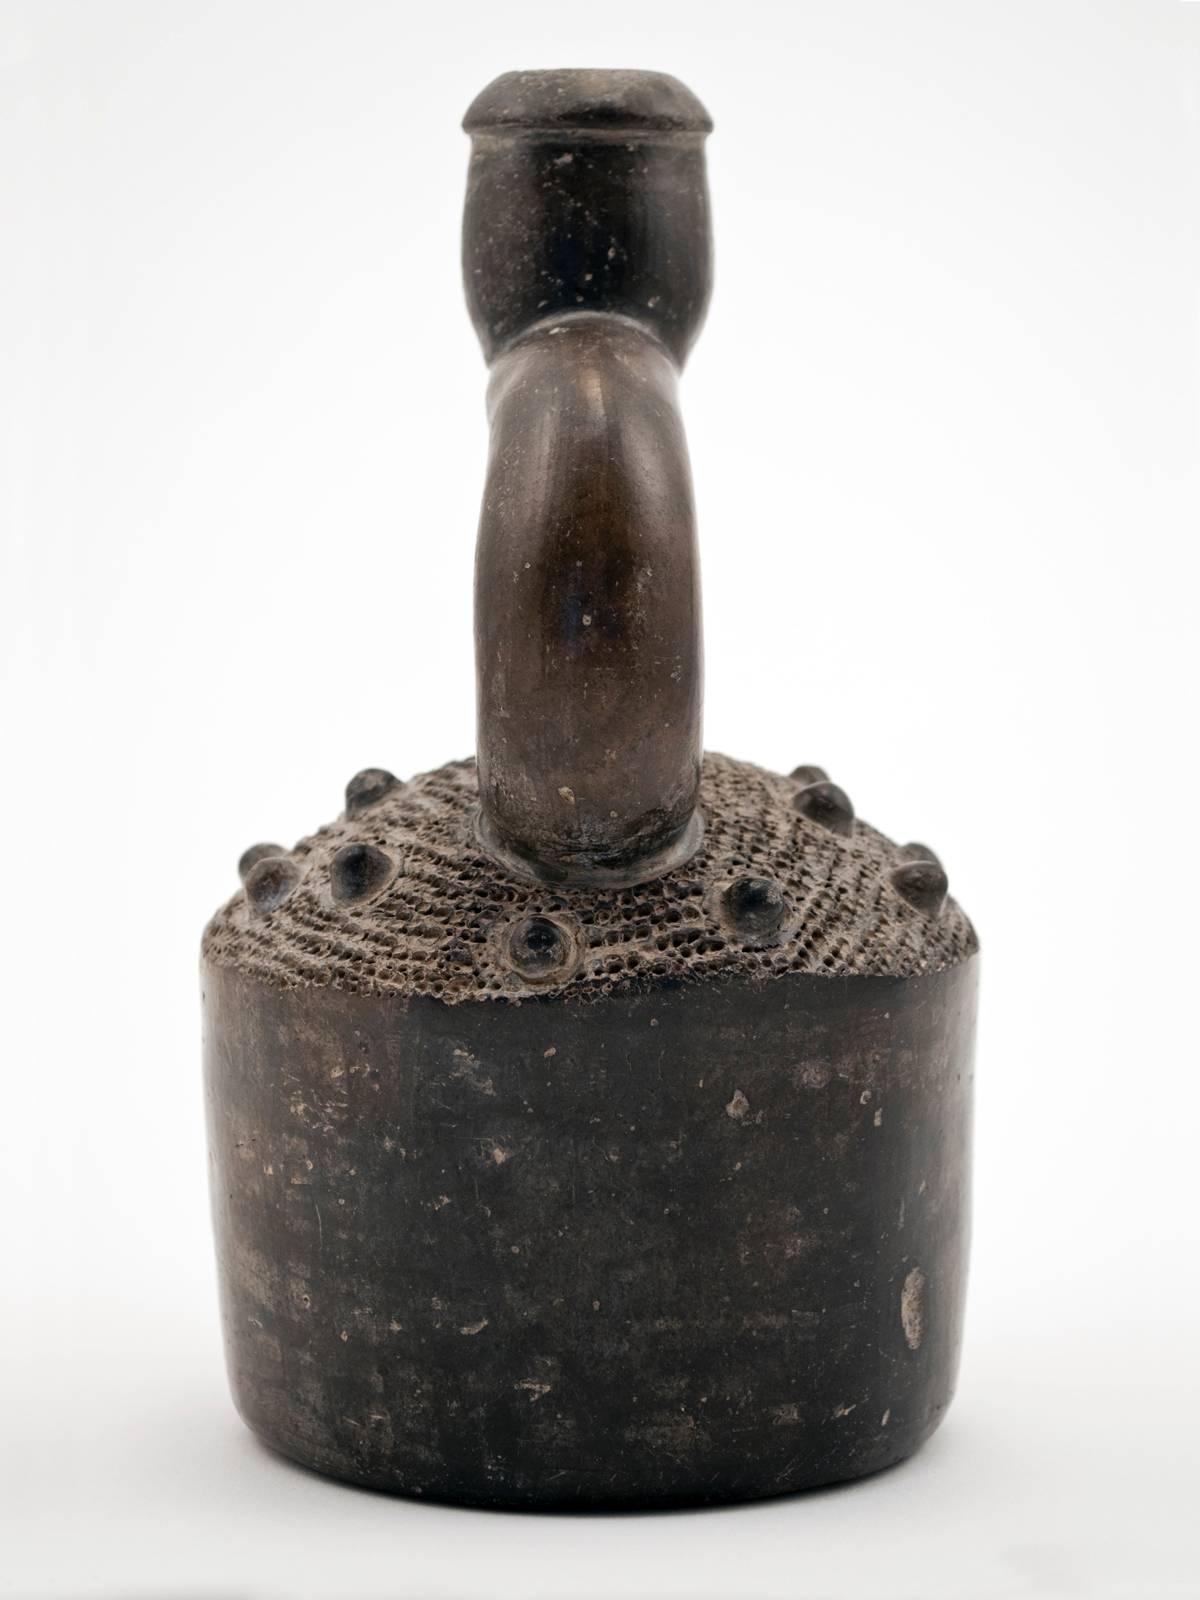 Offered by ZENA KRUZICK
Pre-Columbian Chavin Blackware Stirrup Vessel 
A classic blackware stirrup vessel with picked and knobbed surface. This piece is from the Chavin culture, Tembladera phase, ca. 700-400 B.C.  Stirrup spout vessels were a